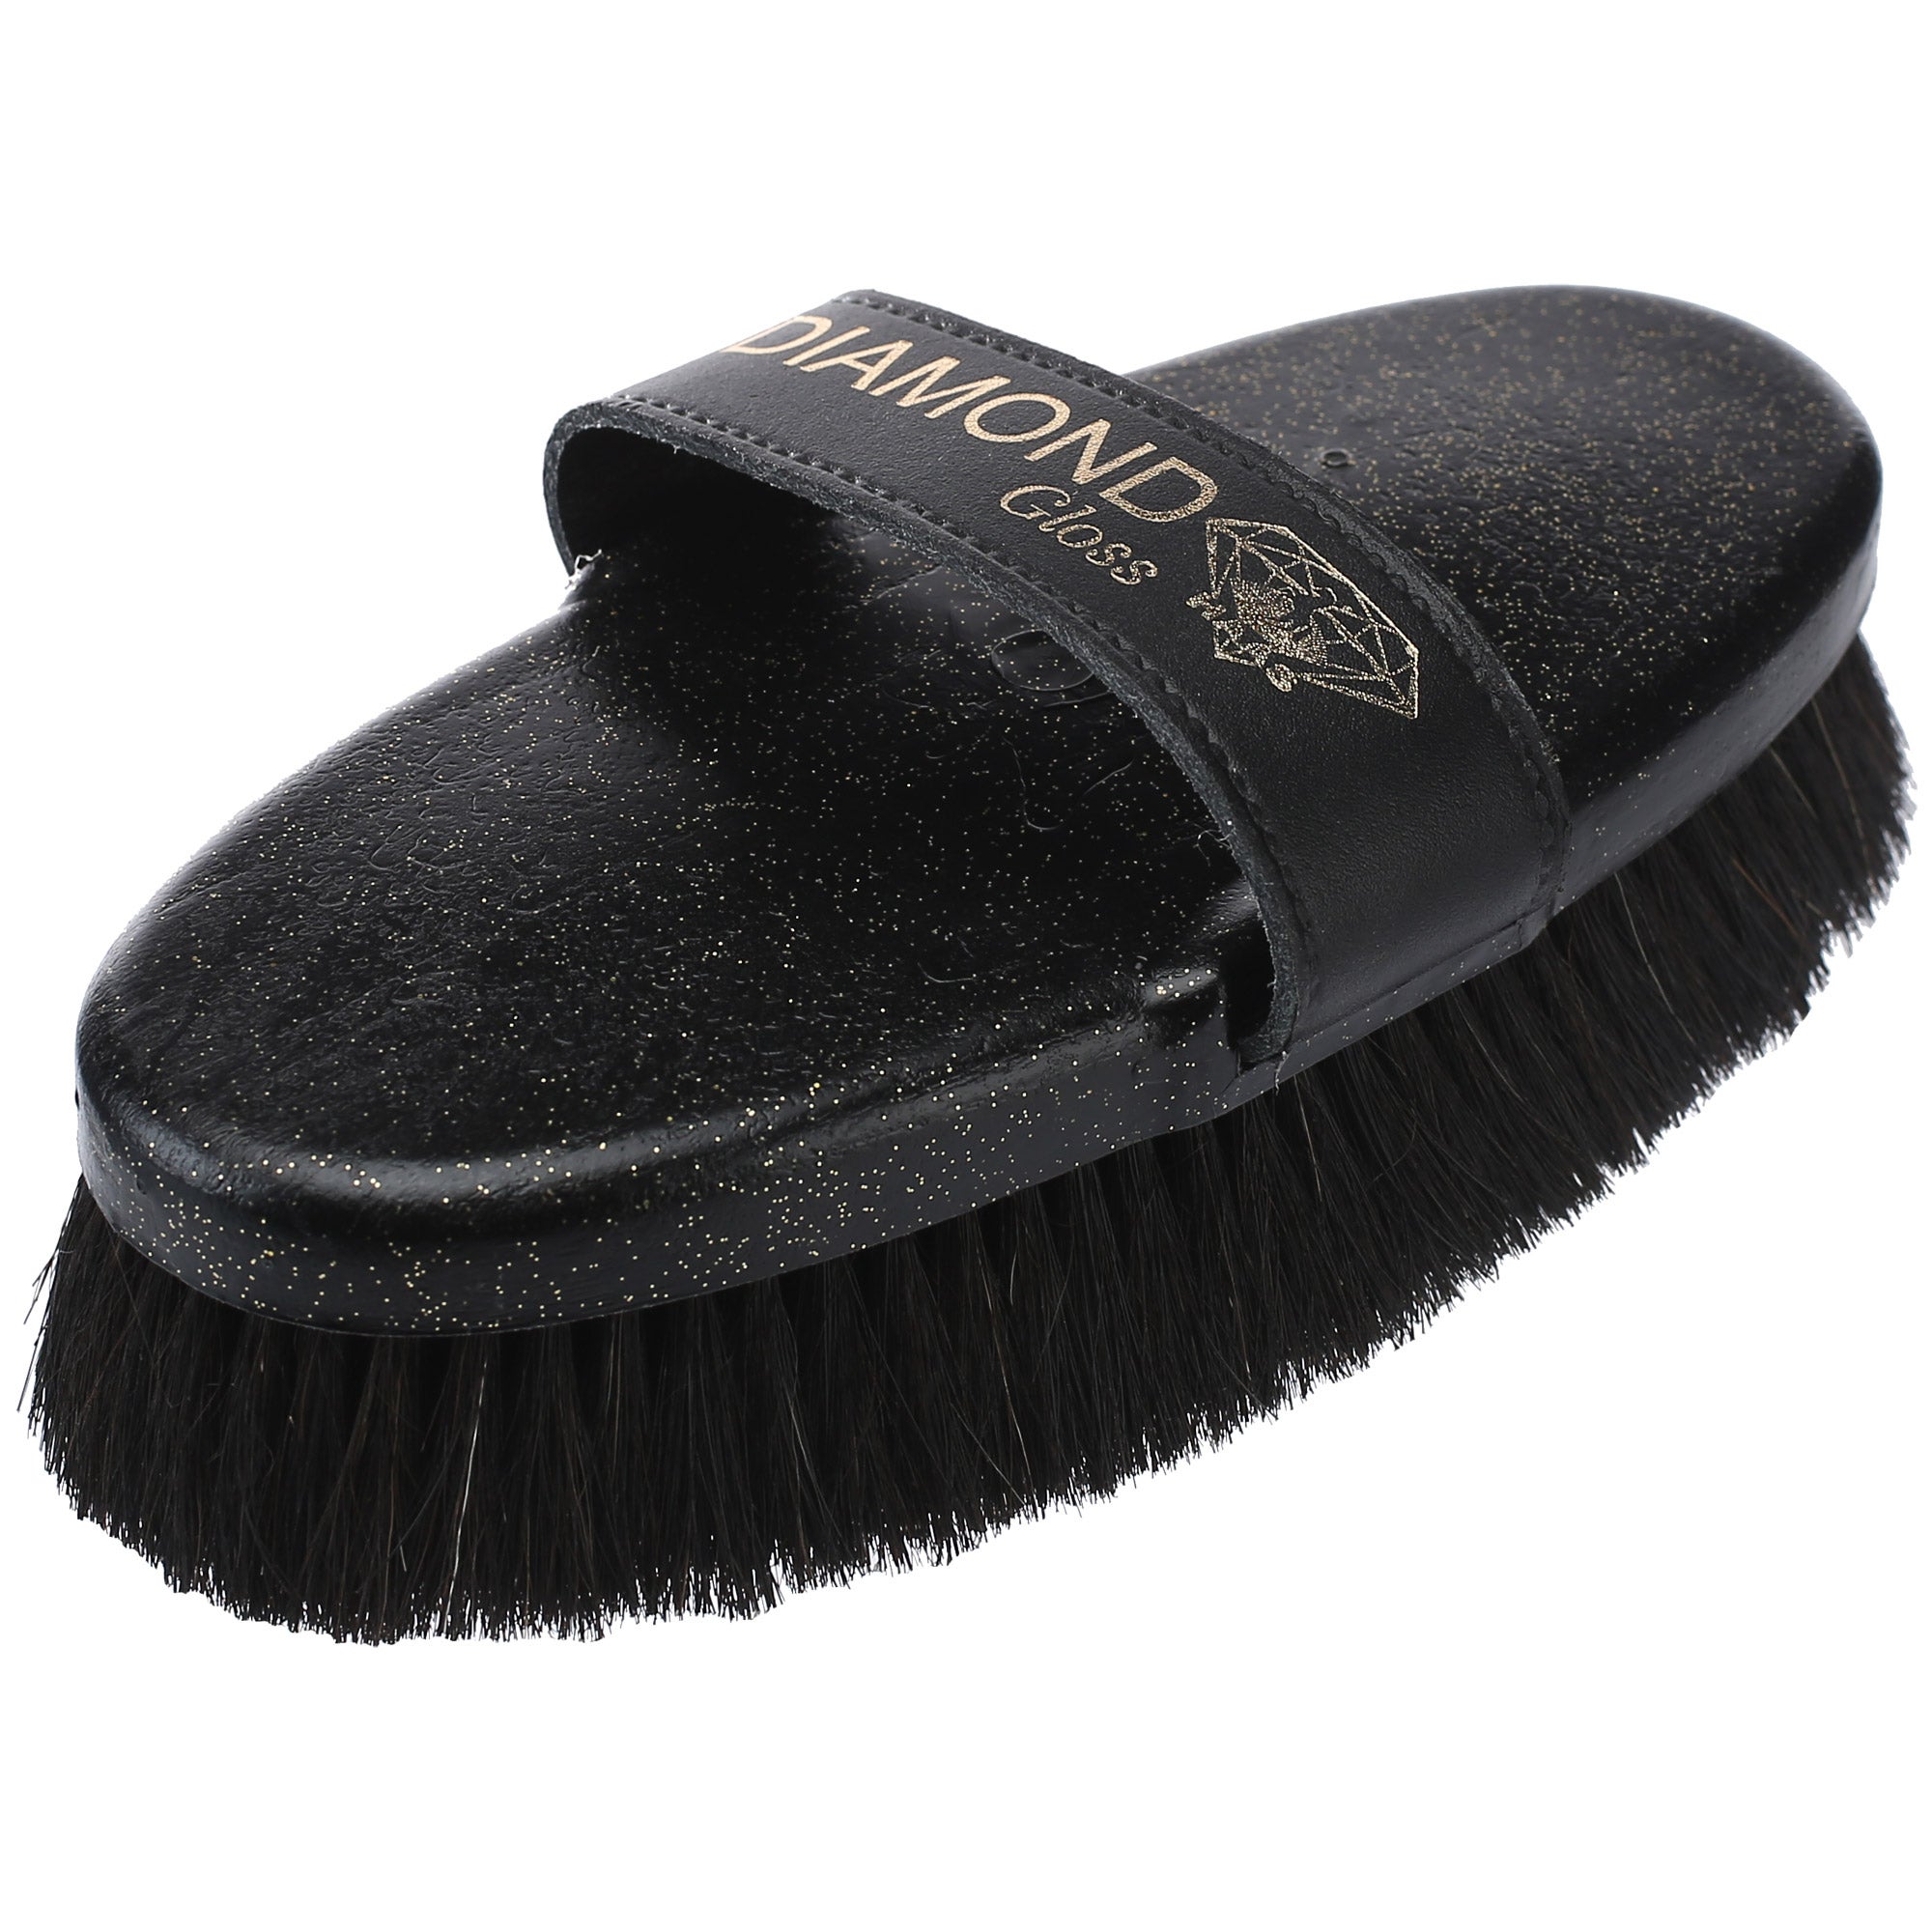 Horse Hair Grooming Brushes Superior Clean,FREE DELIVERY Haas CAVALIERE Brush 